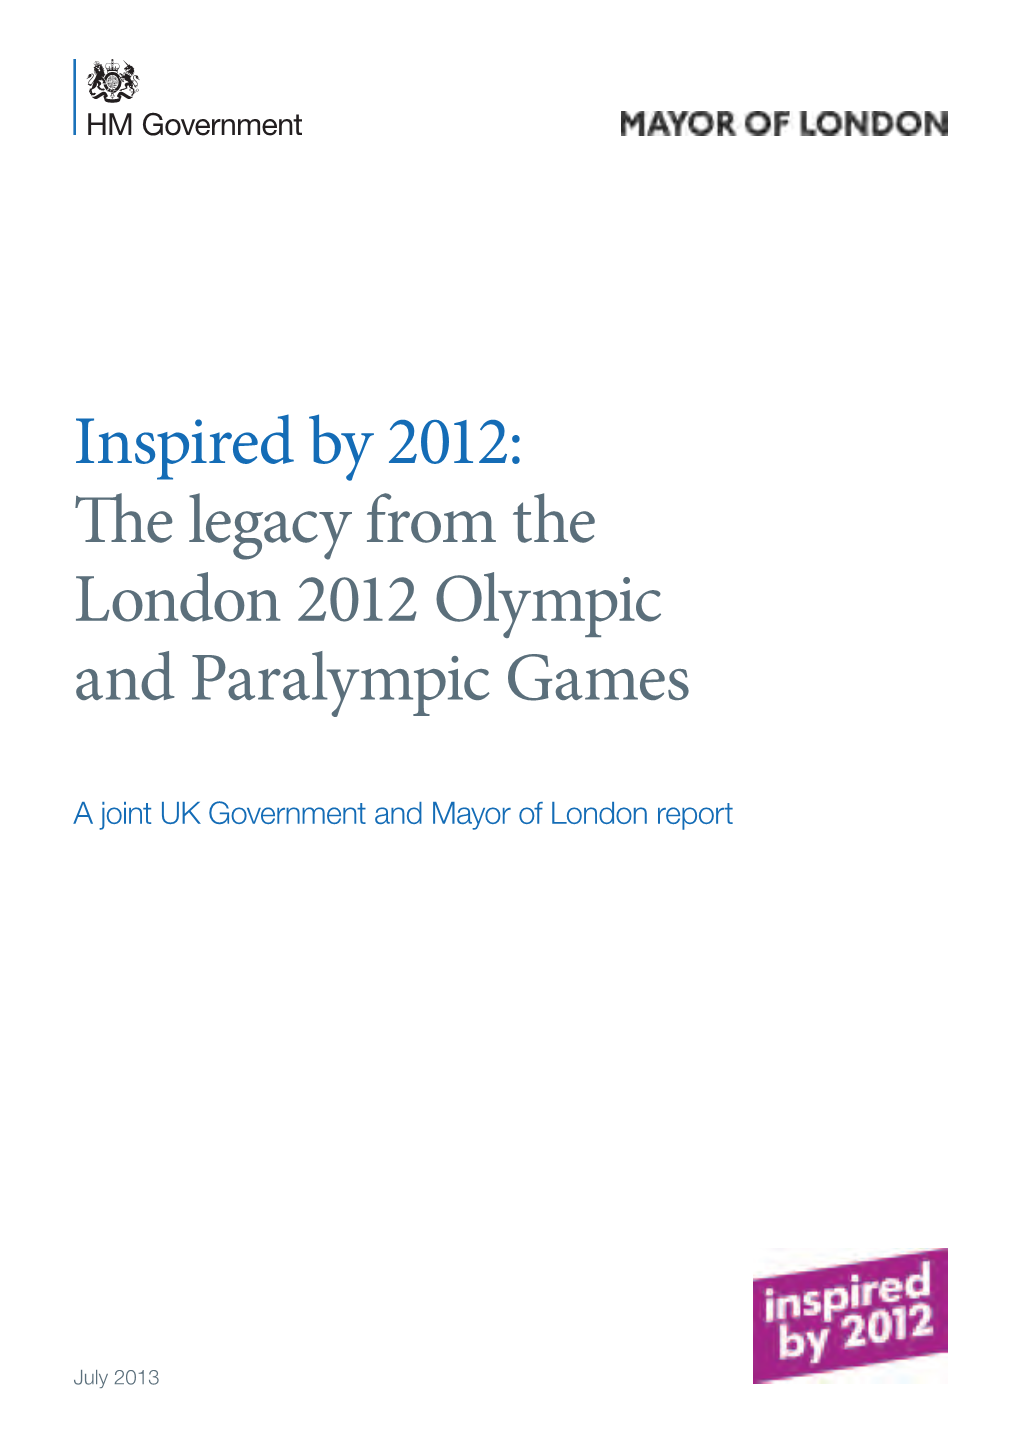 The Legacy from the London 2012 Olympic and Paralympic Games